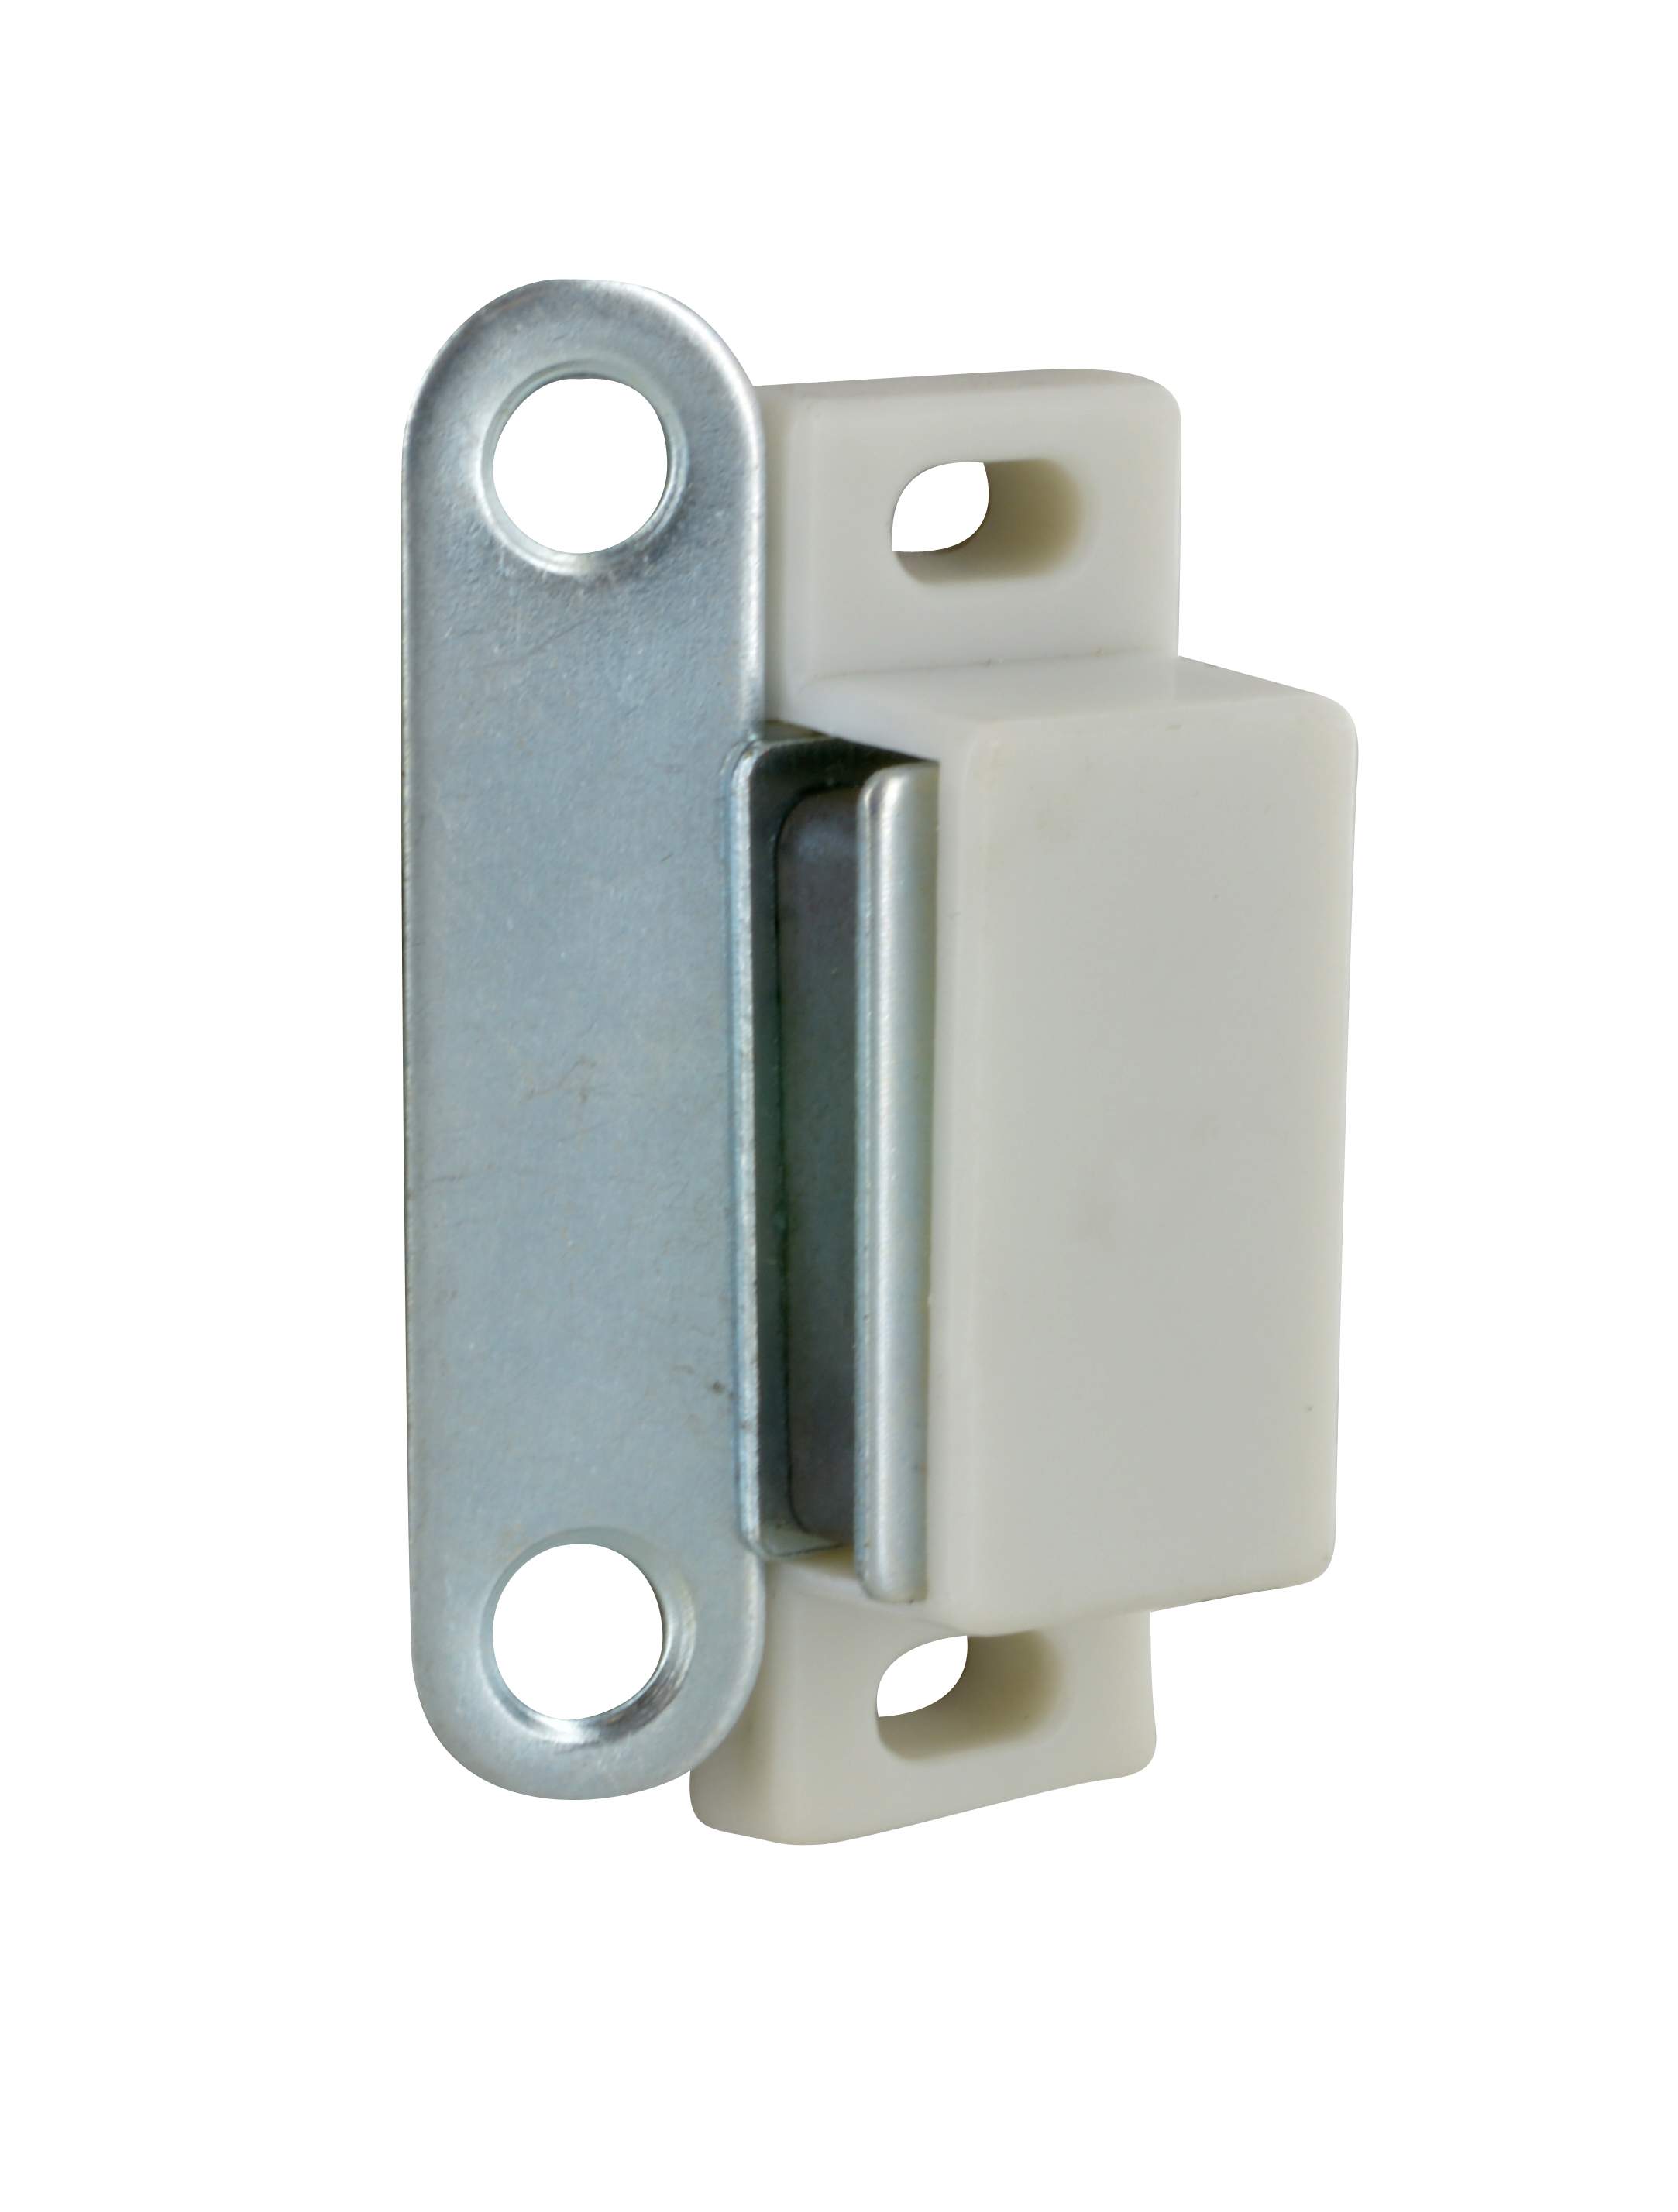 Magnetic latch white 2kg, 46x16x15 mm, 2 pieces